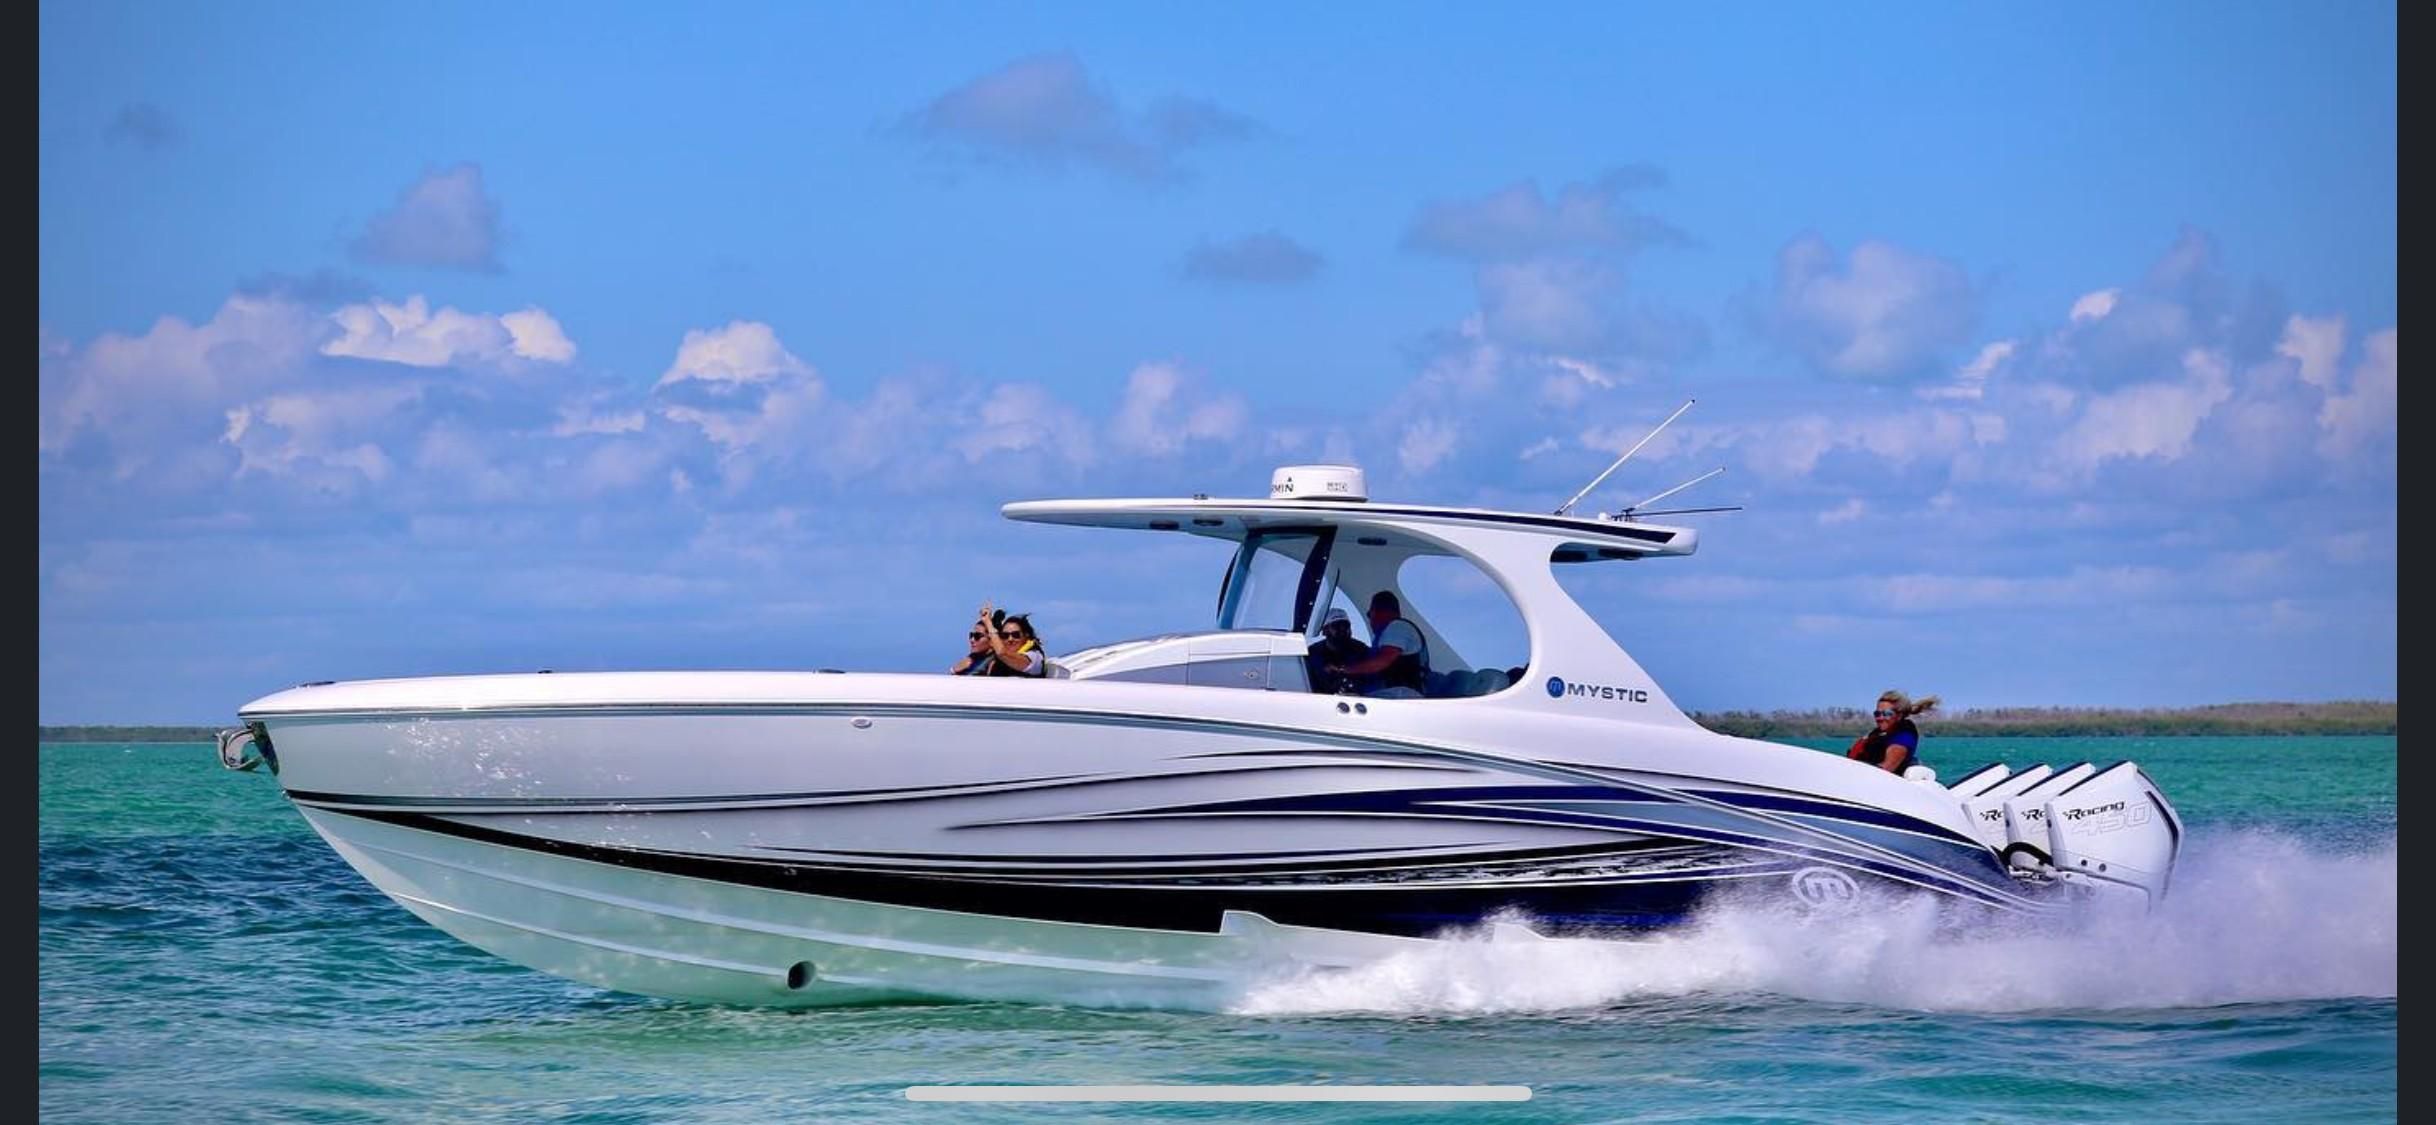 2020 Mystic Powerboats M4200 Racinghigh Performance For Sale Yachtworld